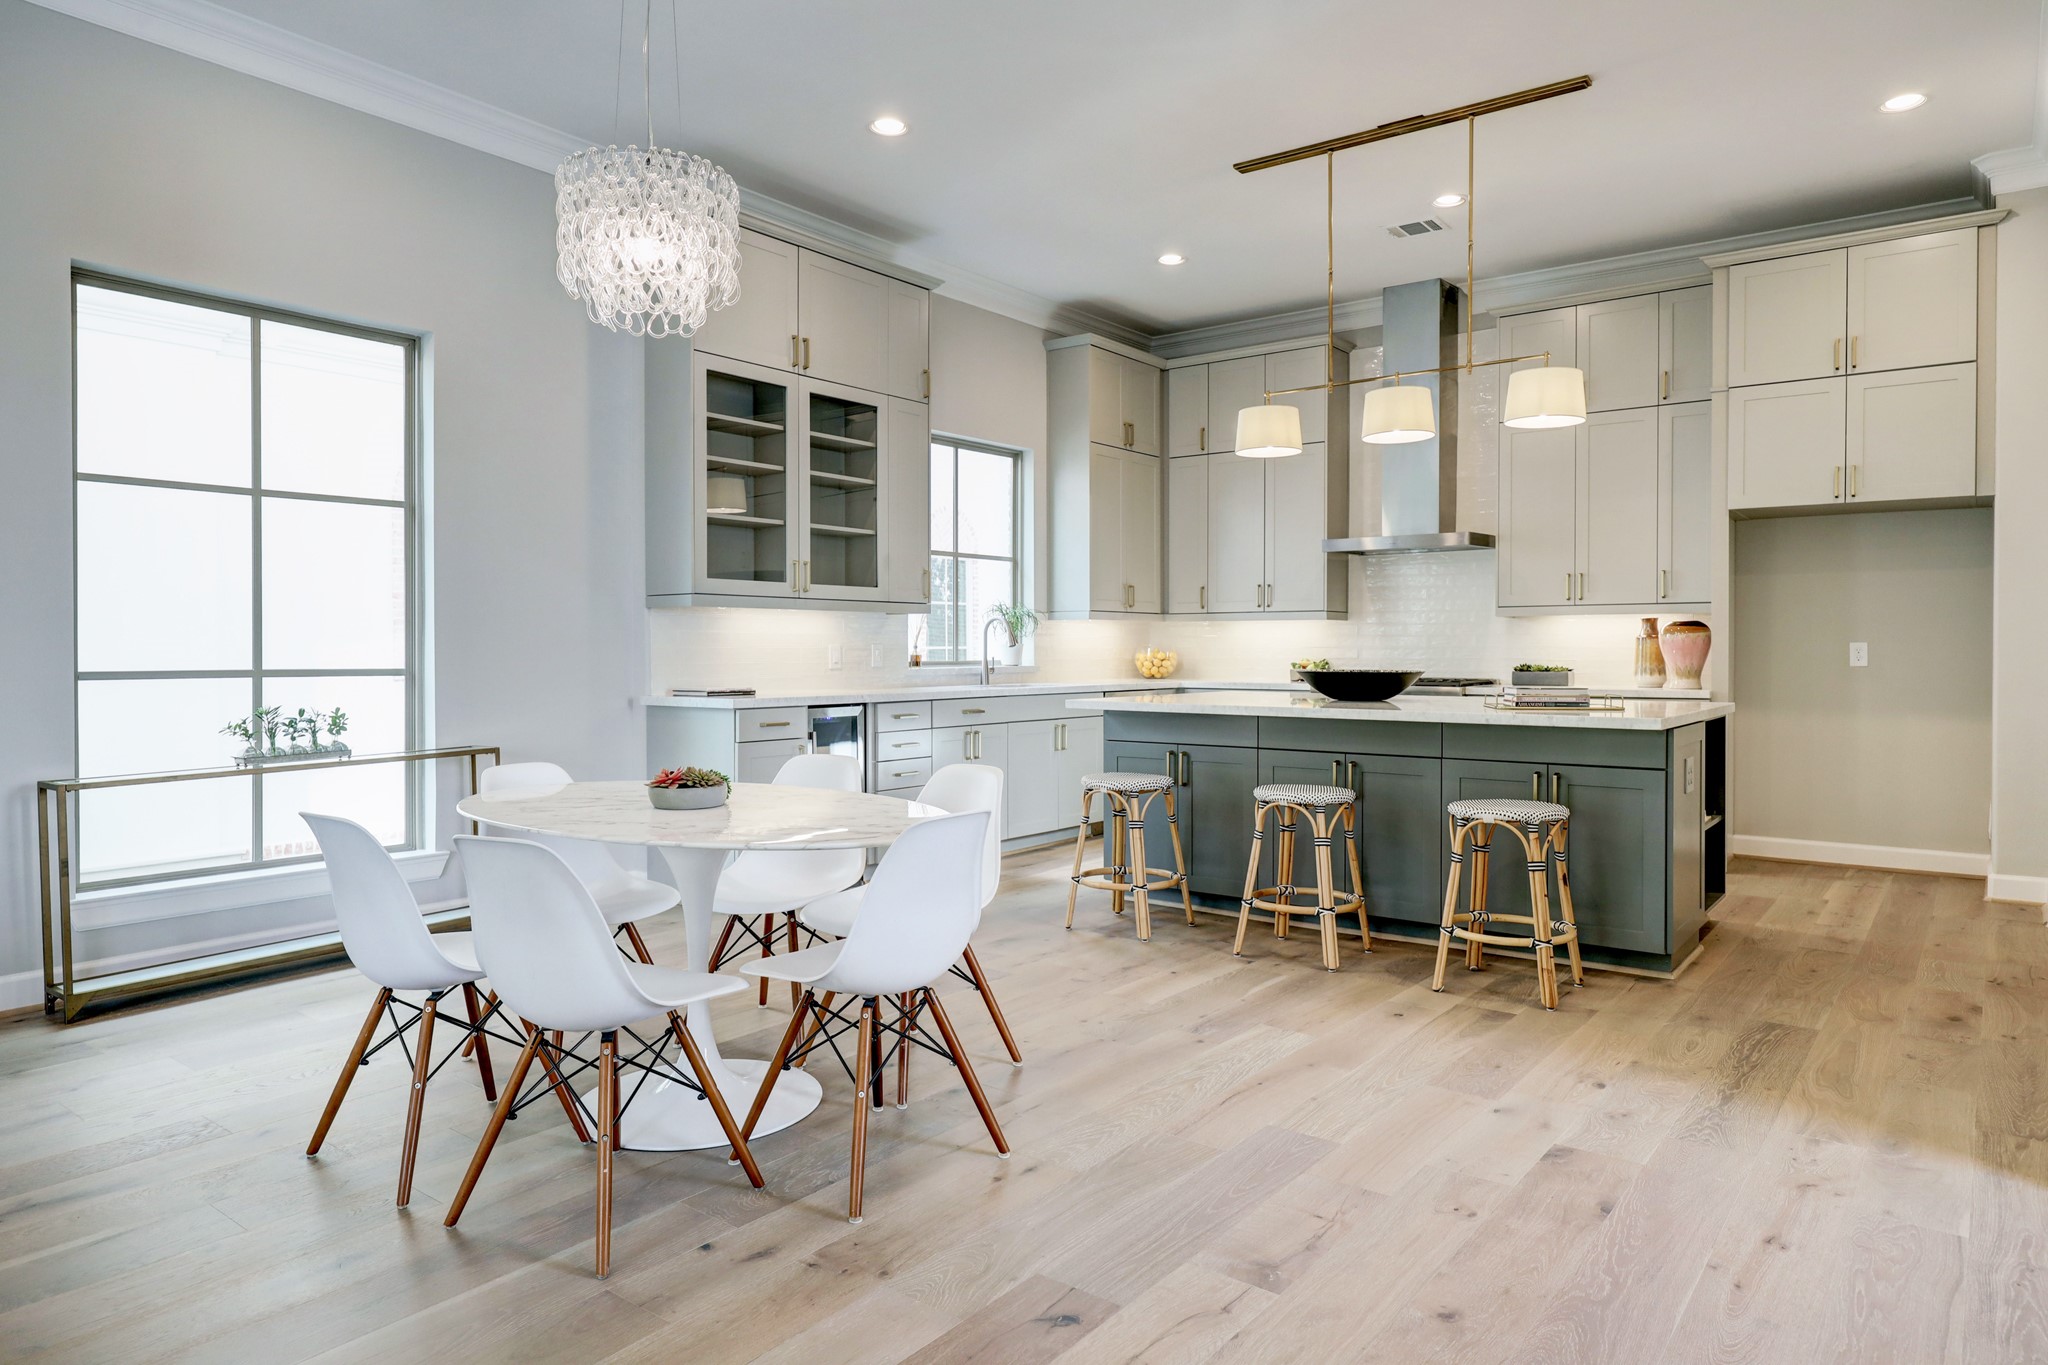 Bright and airy eat-in kitchen opens to the living and dining areas.